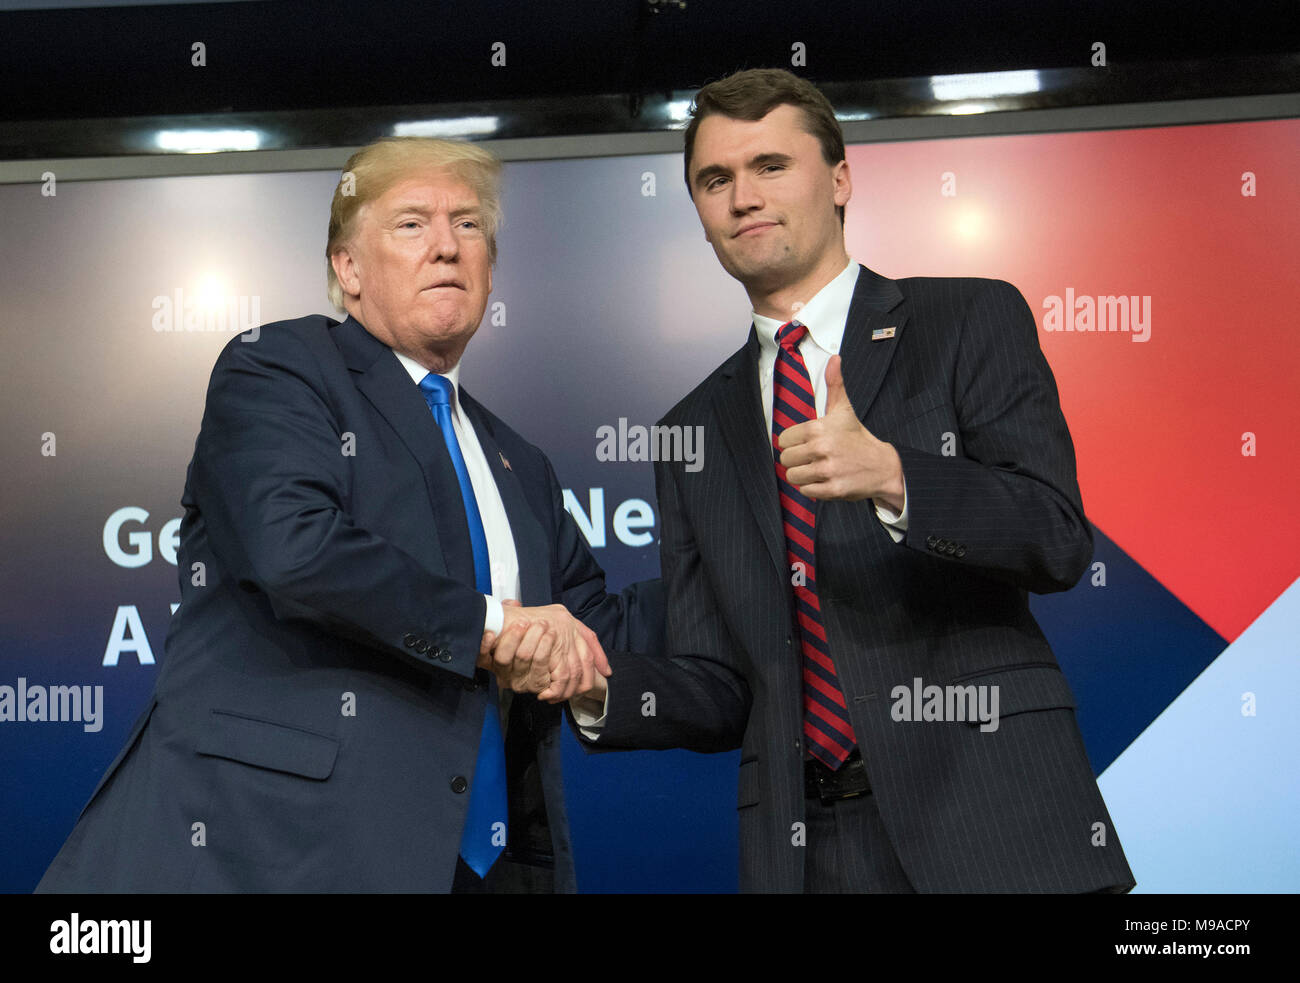 Washington, USA. 22nd Mar, 2018. United States President Donald J. Trump, left, shakes hands with with Charlie Kirk, Founder and Executive Director of Turning Point USA, right, after participating in a panel discussion, at the Generation Next Summit at the White House in Washington, DC on Thursday, March 22, 2018. Credit: Ron Sachs/CNP - NO WIRE SERVICE · Credit: Ron Sachs/Consolidated News Photos/Ron Sachs - CNP/dpa/Alamy Live News Stock Photo